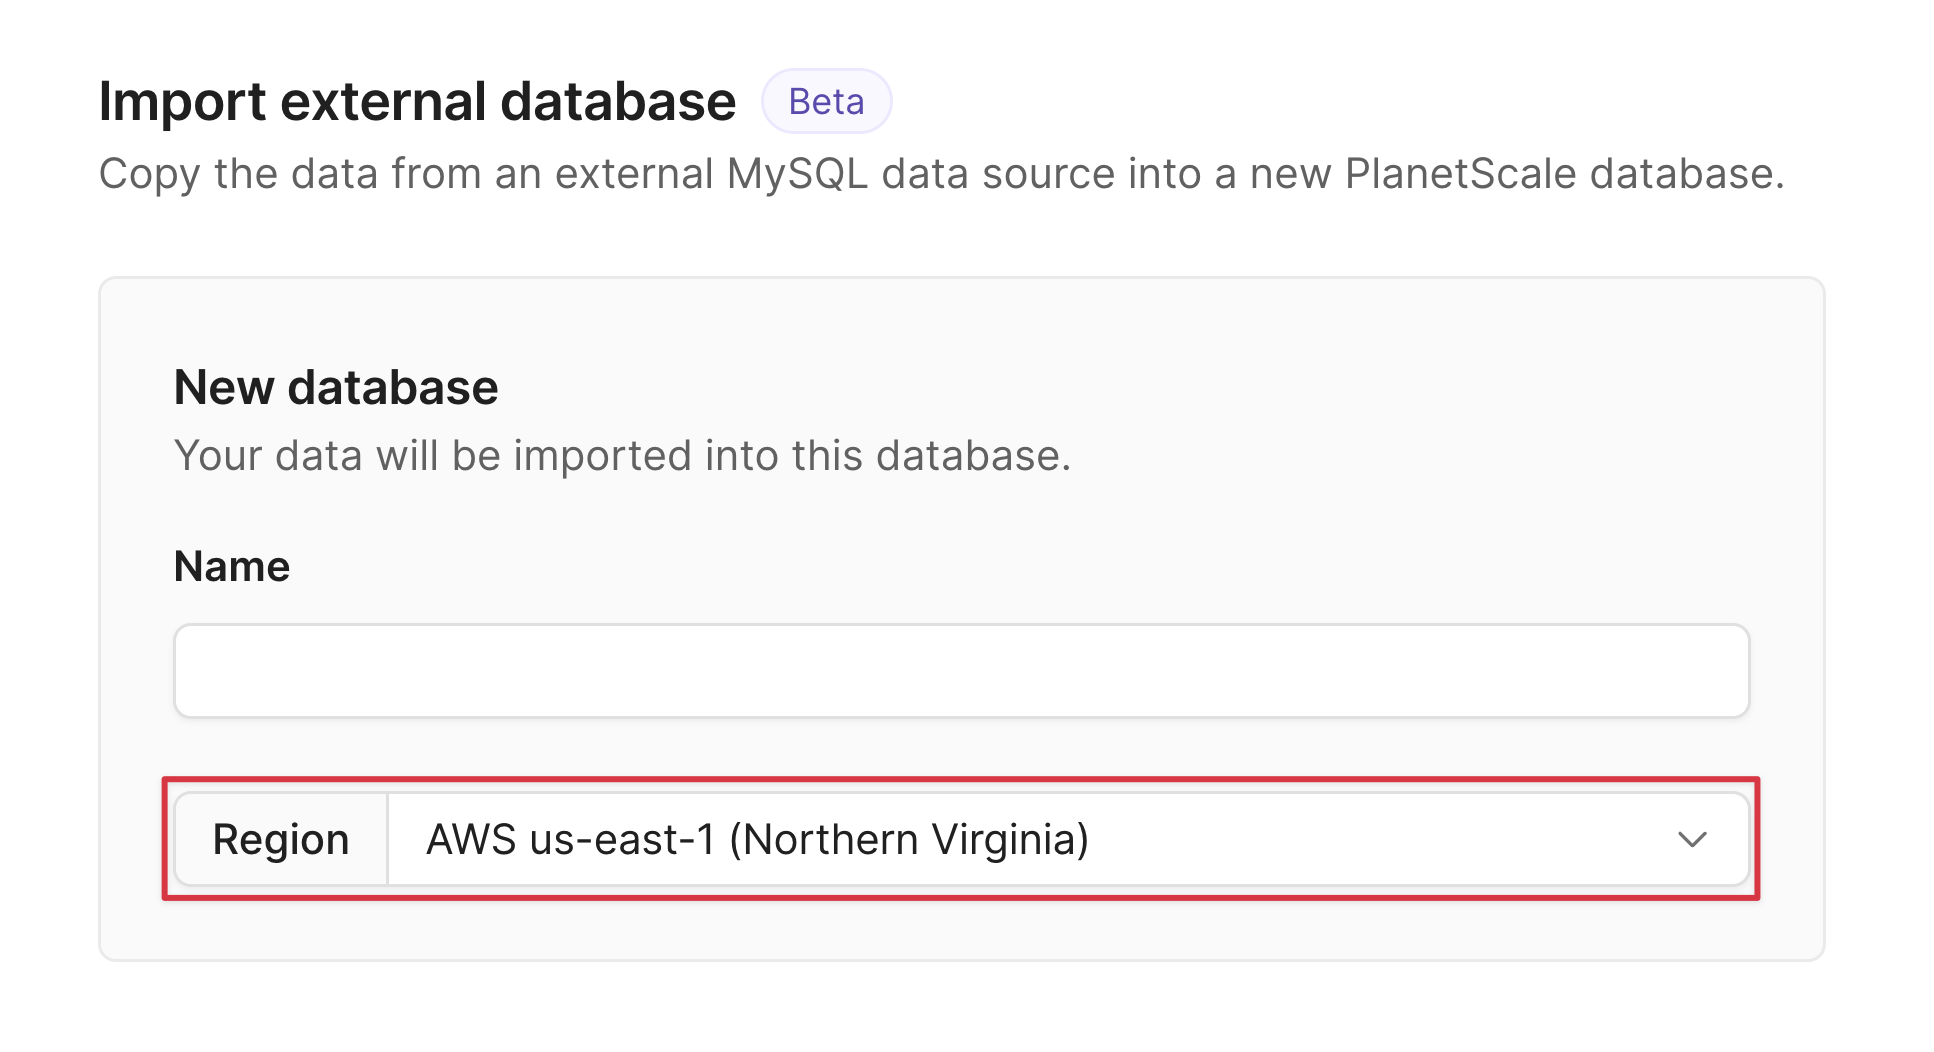 The New database section of the Import database tool.